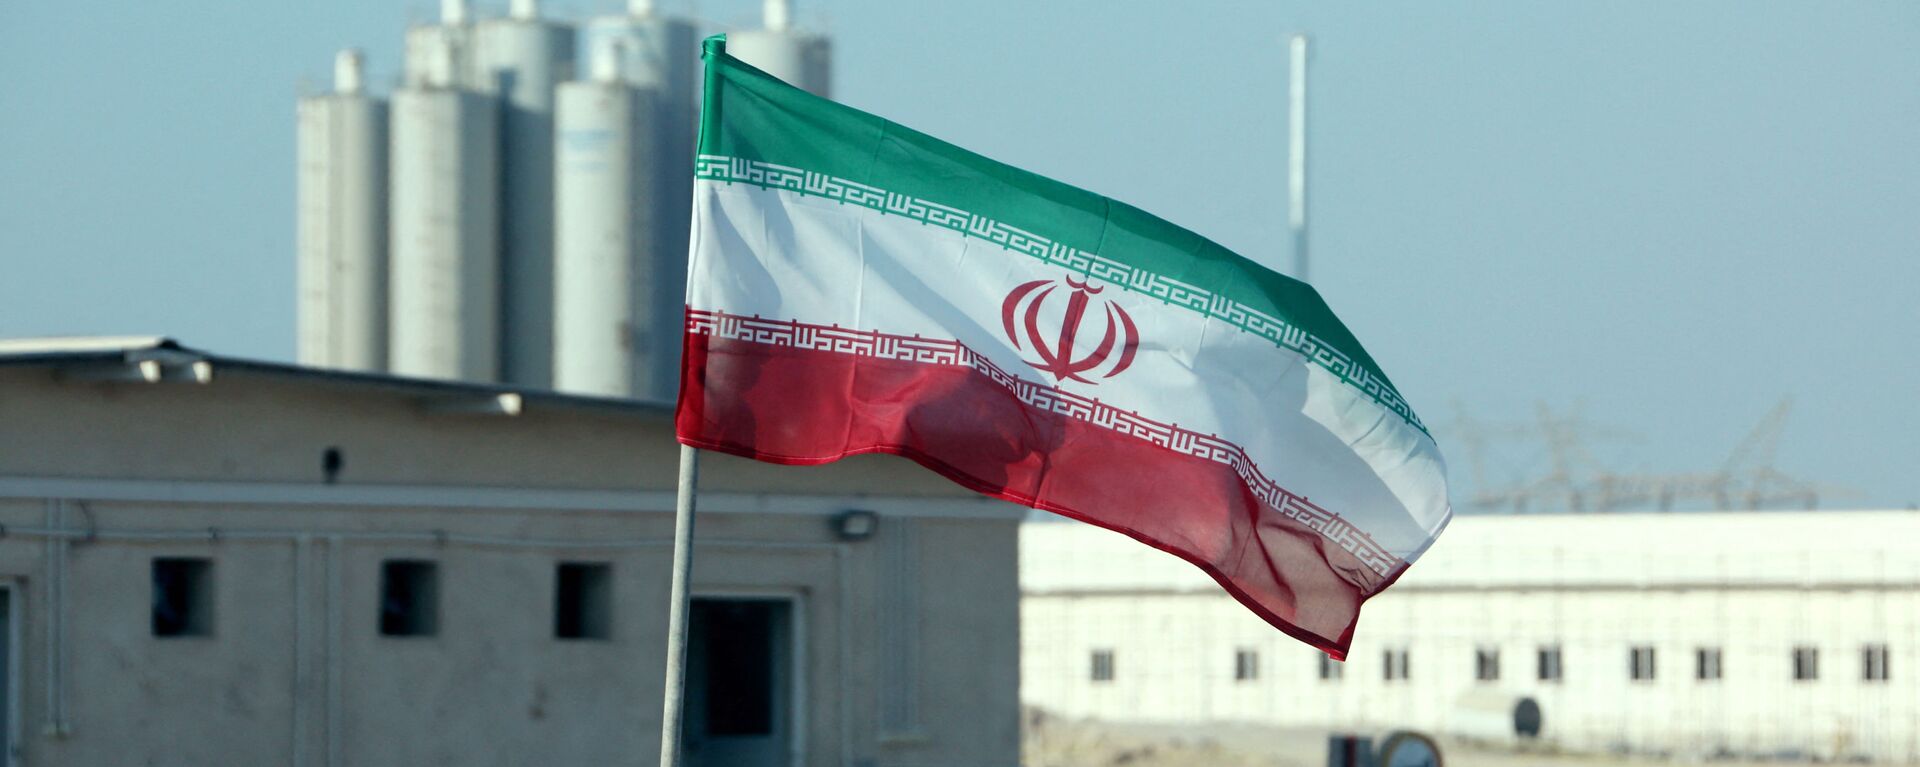 A picture taken on November 10, 2019, shows an Iranian flag in Iran's Bushehr nuclear power plant, during an official ceremony to kick-start works on a second reactor at the facility - Sputnik International, 1920, 12.09.2021